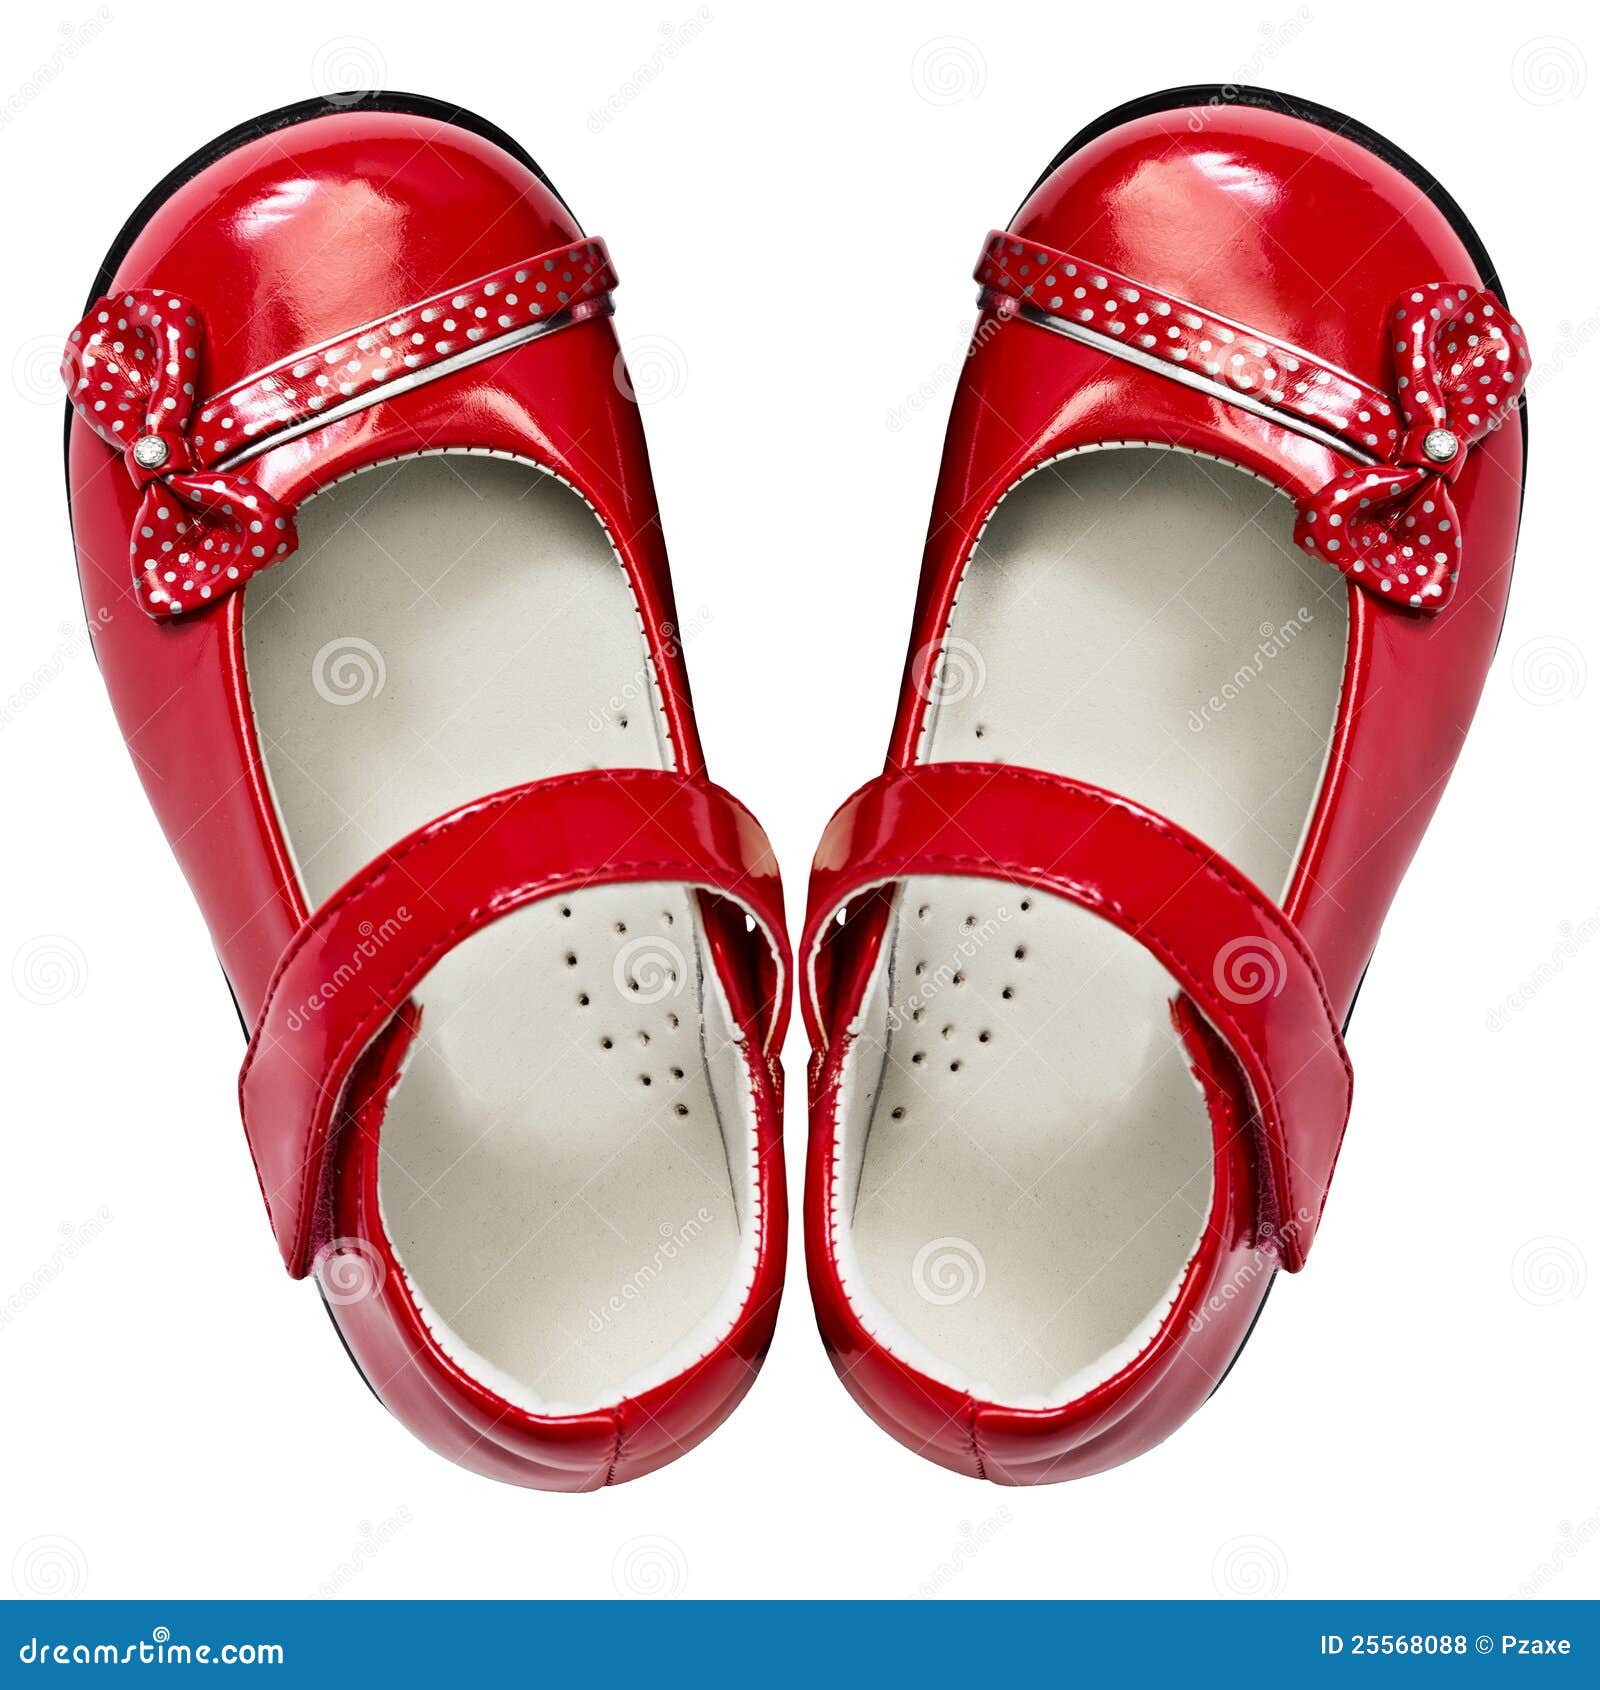 Baby red shoes on white stock photo. Image of object - 25568088